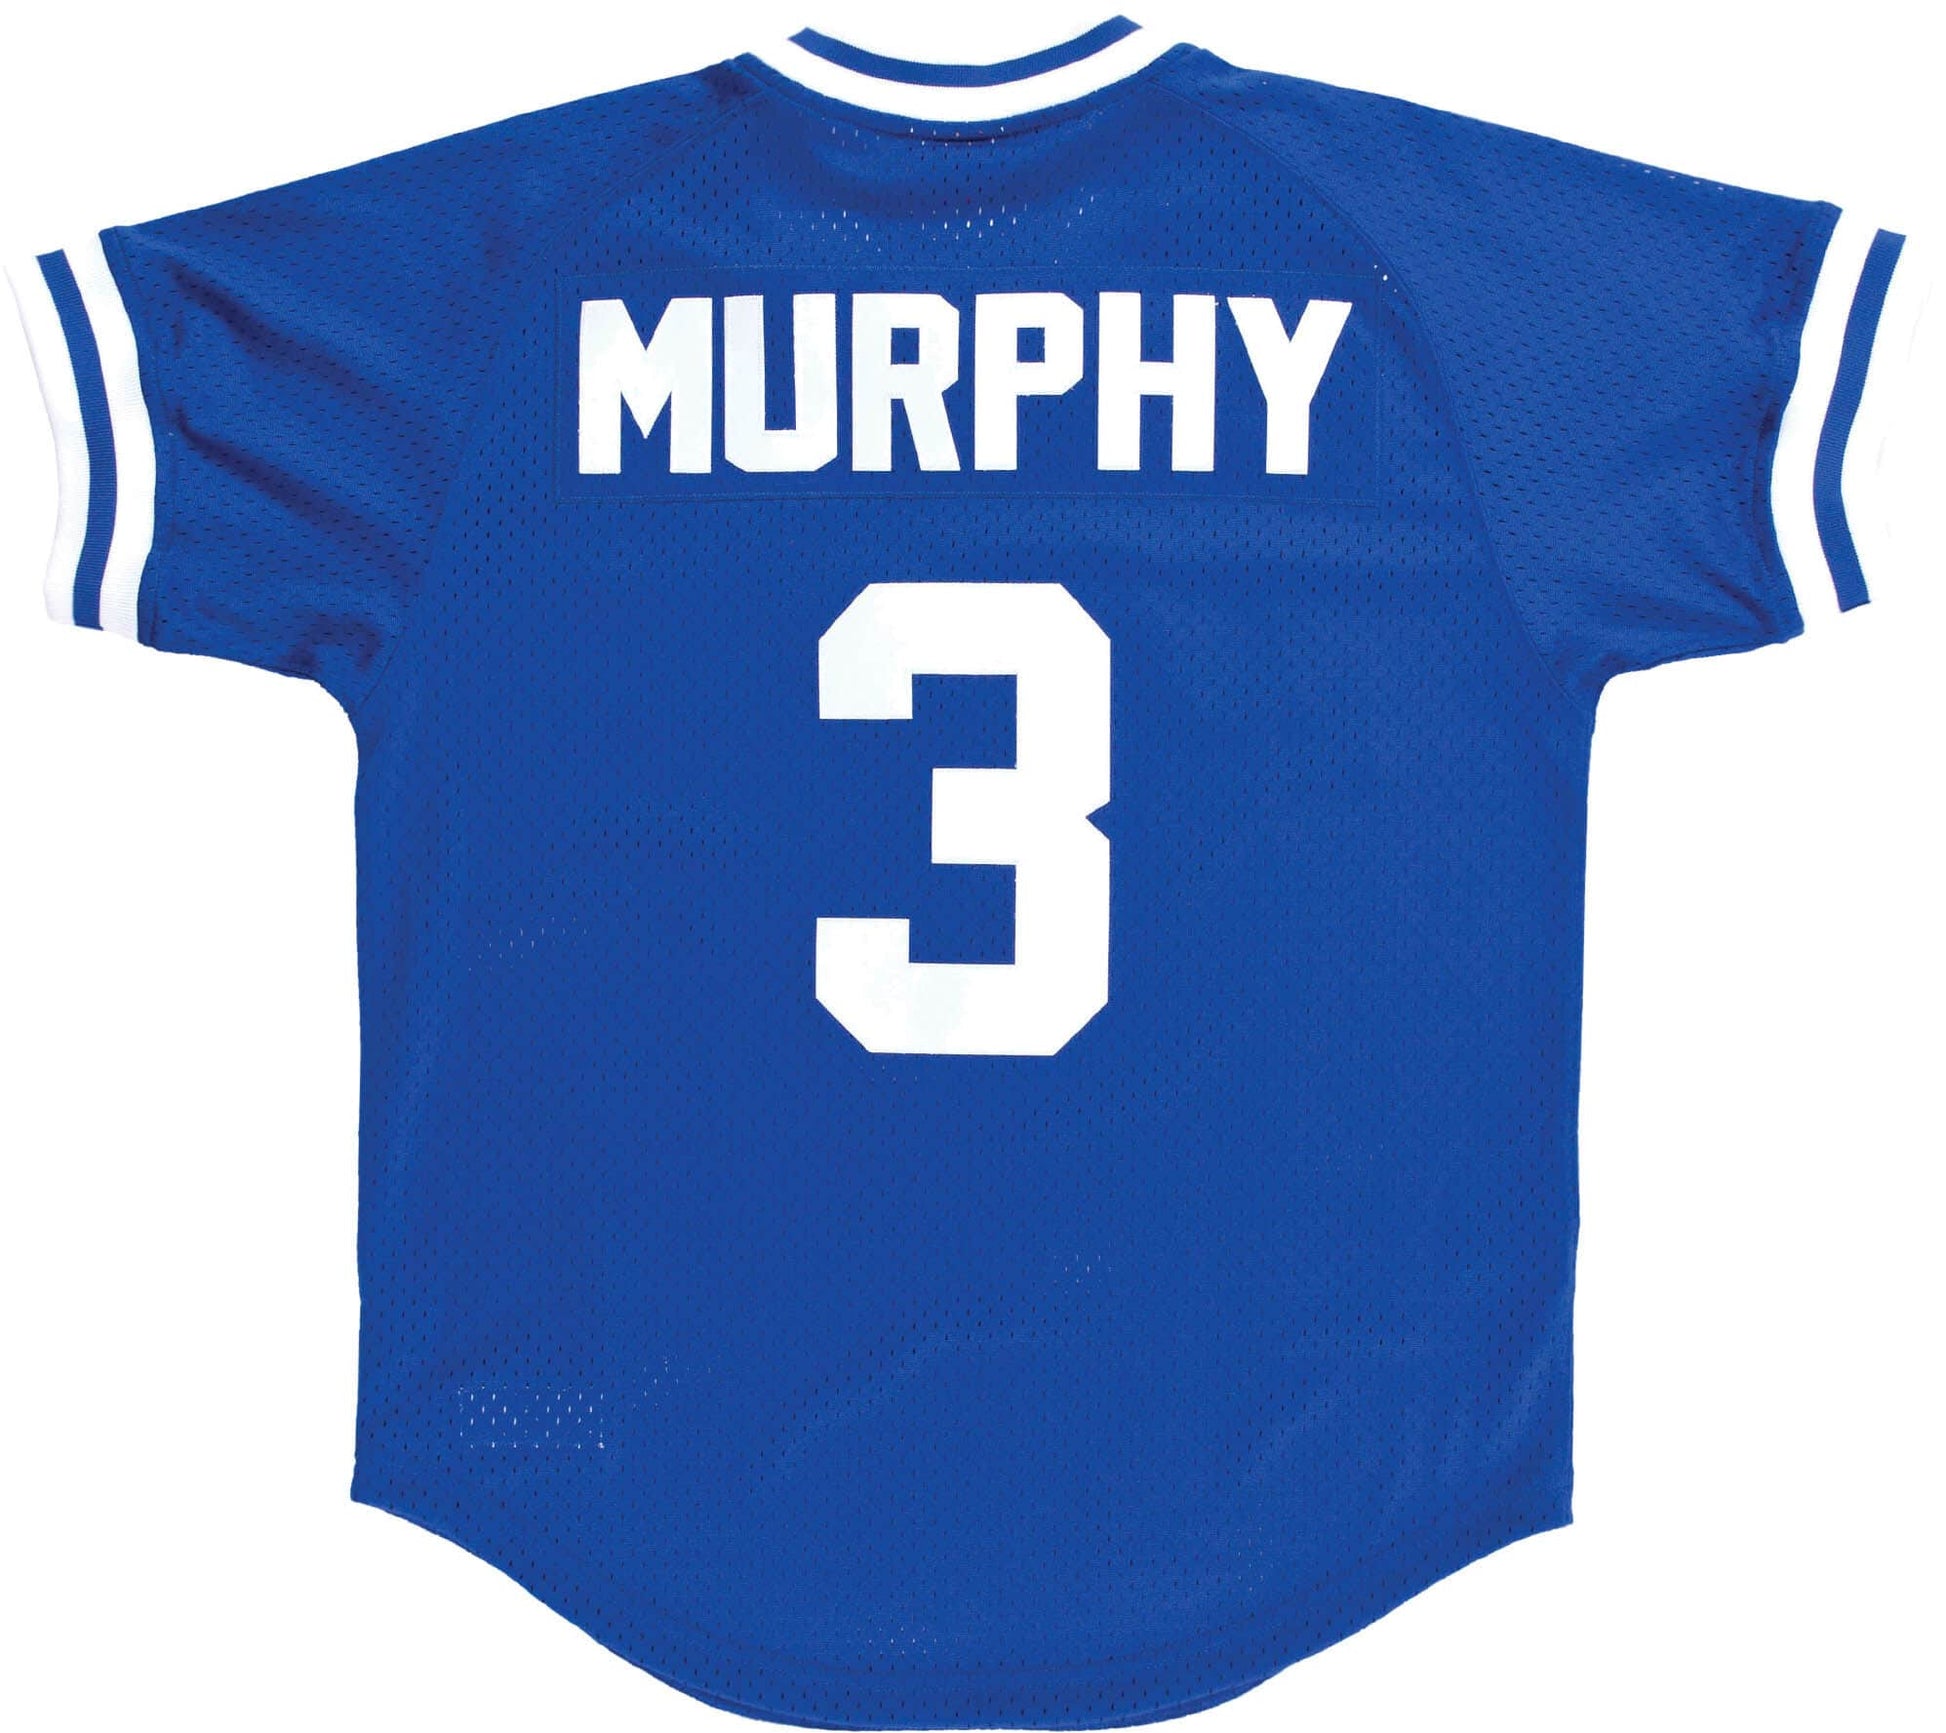 dale murphy authentic jersey